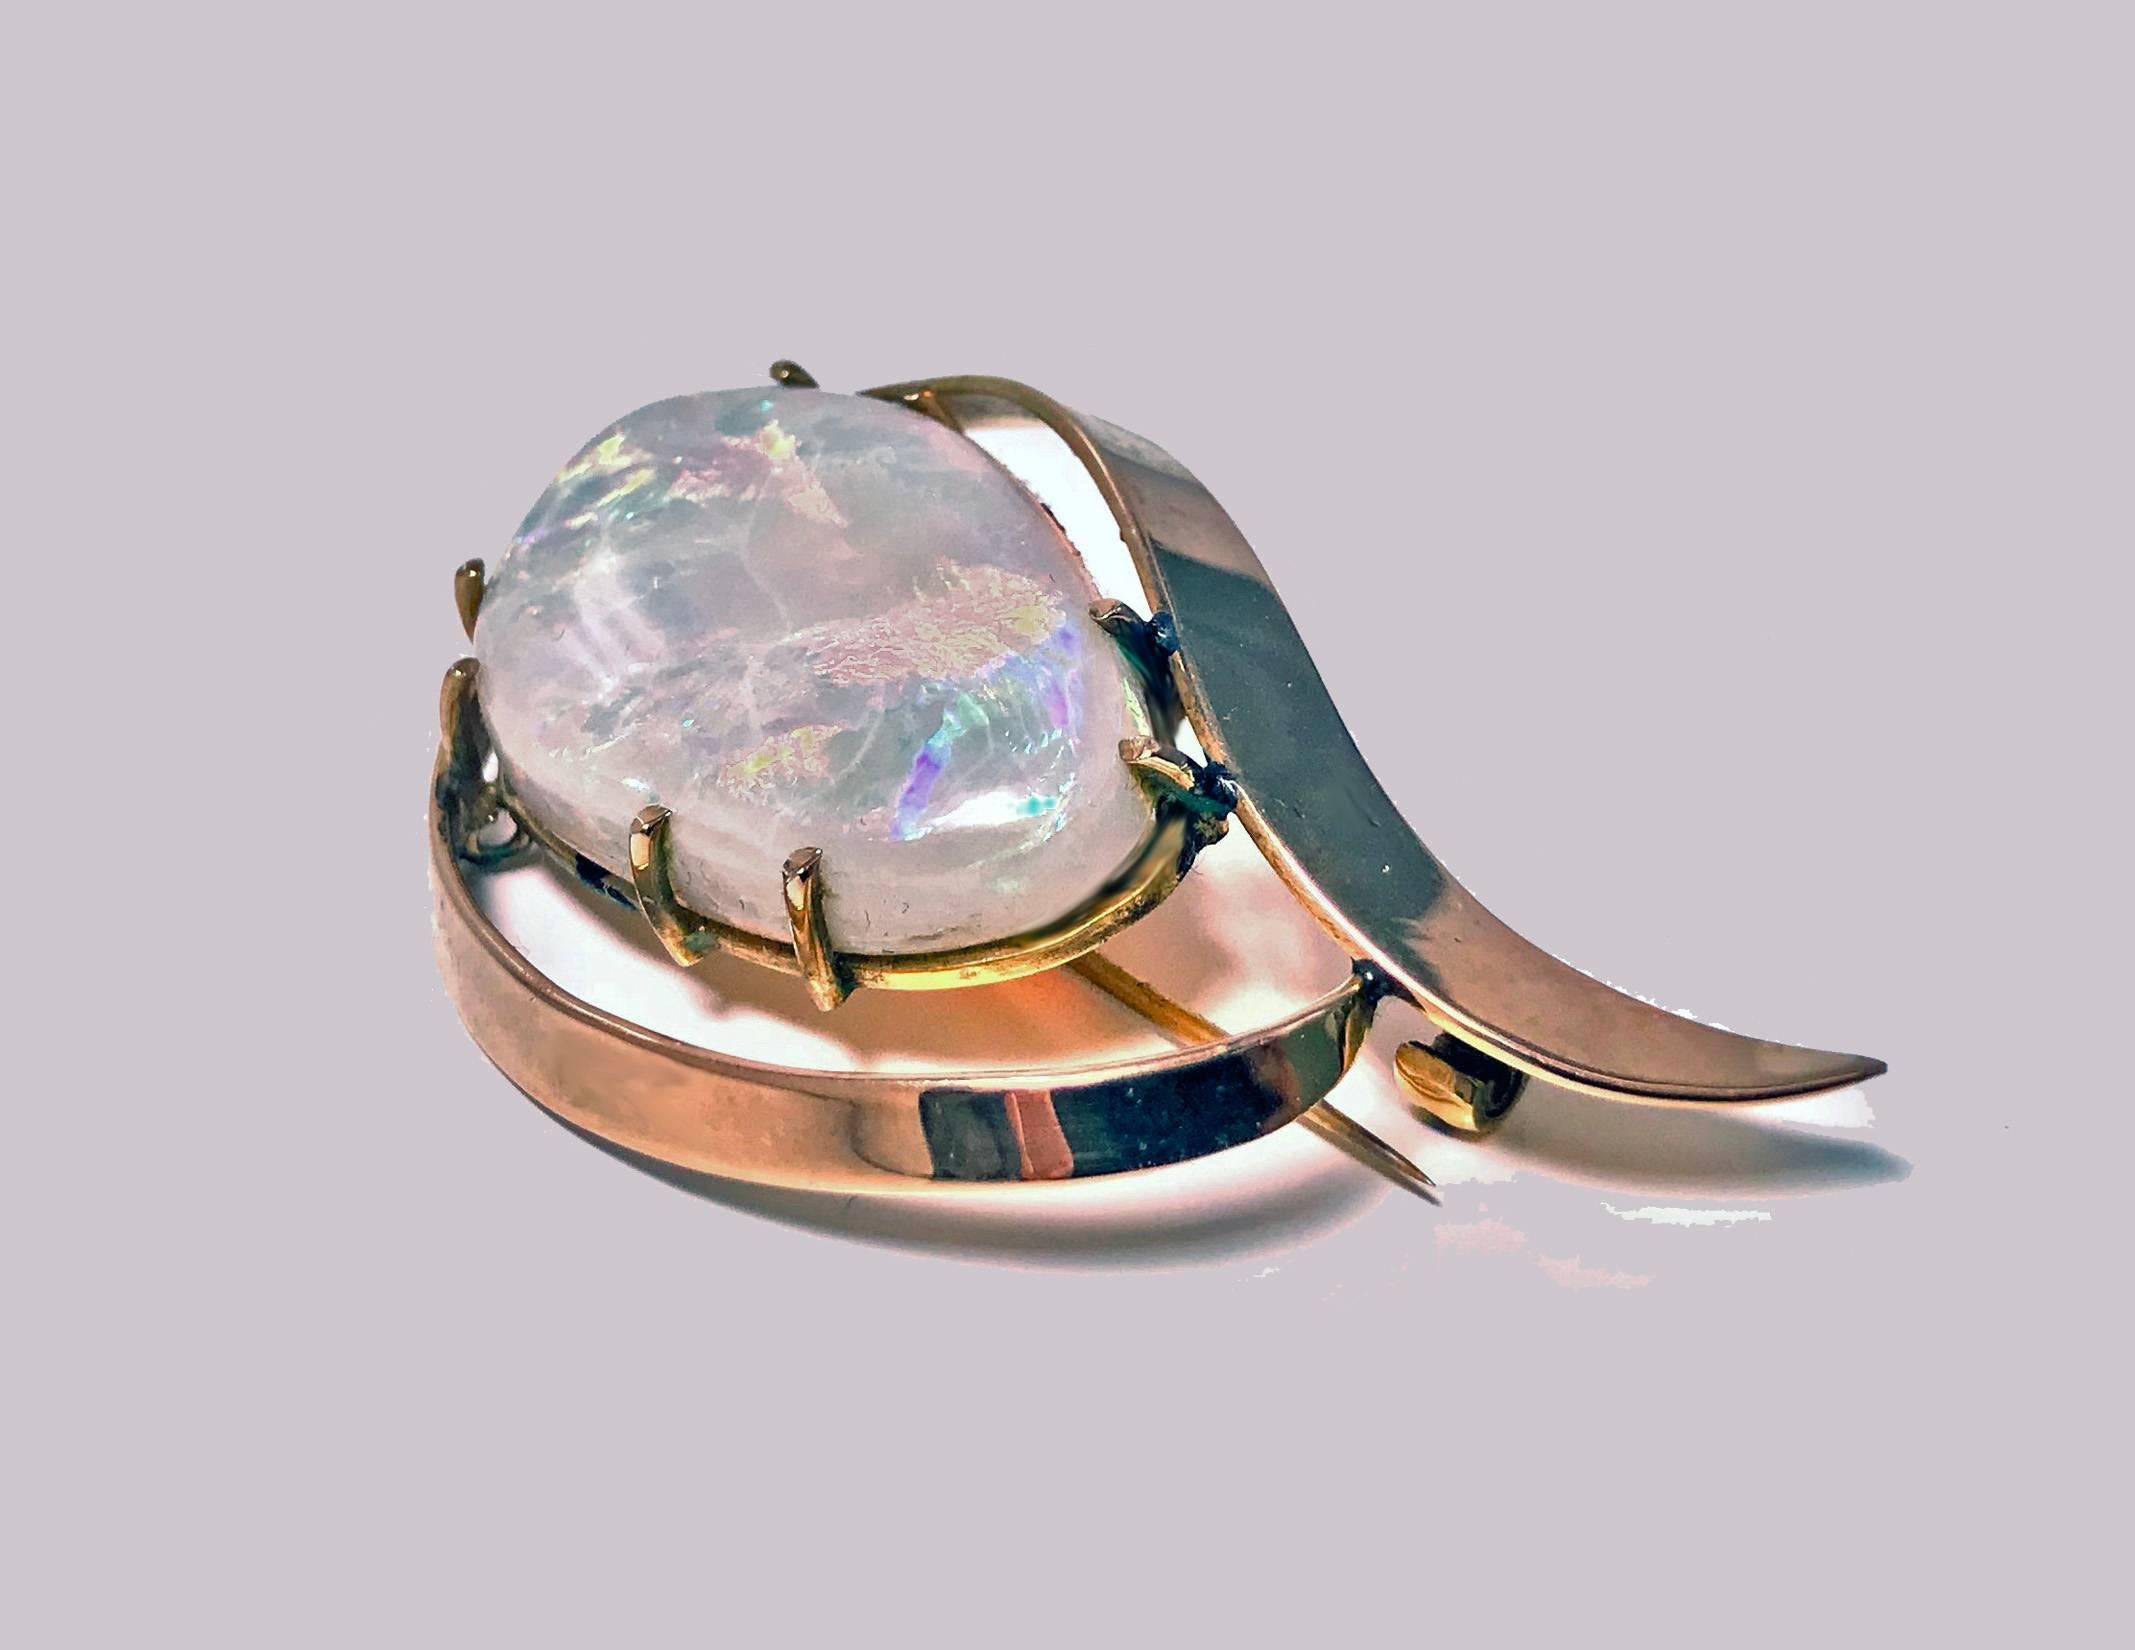 Retro 1960’s large Opal Gold Brooch. The Australian asymmetrical crystal opal gauging approximately 31 x 19 x 5.50 mm semi-translucent good play of colour bright green blue, purple and orange. The opal is claw set with swirl plain polished gold